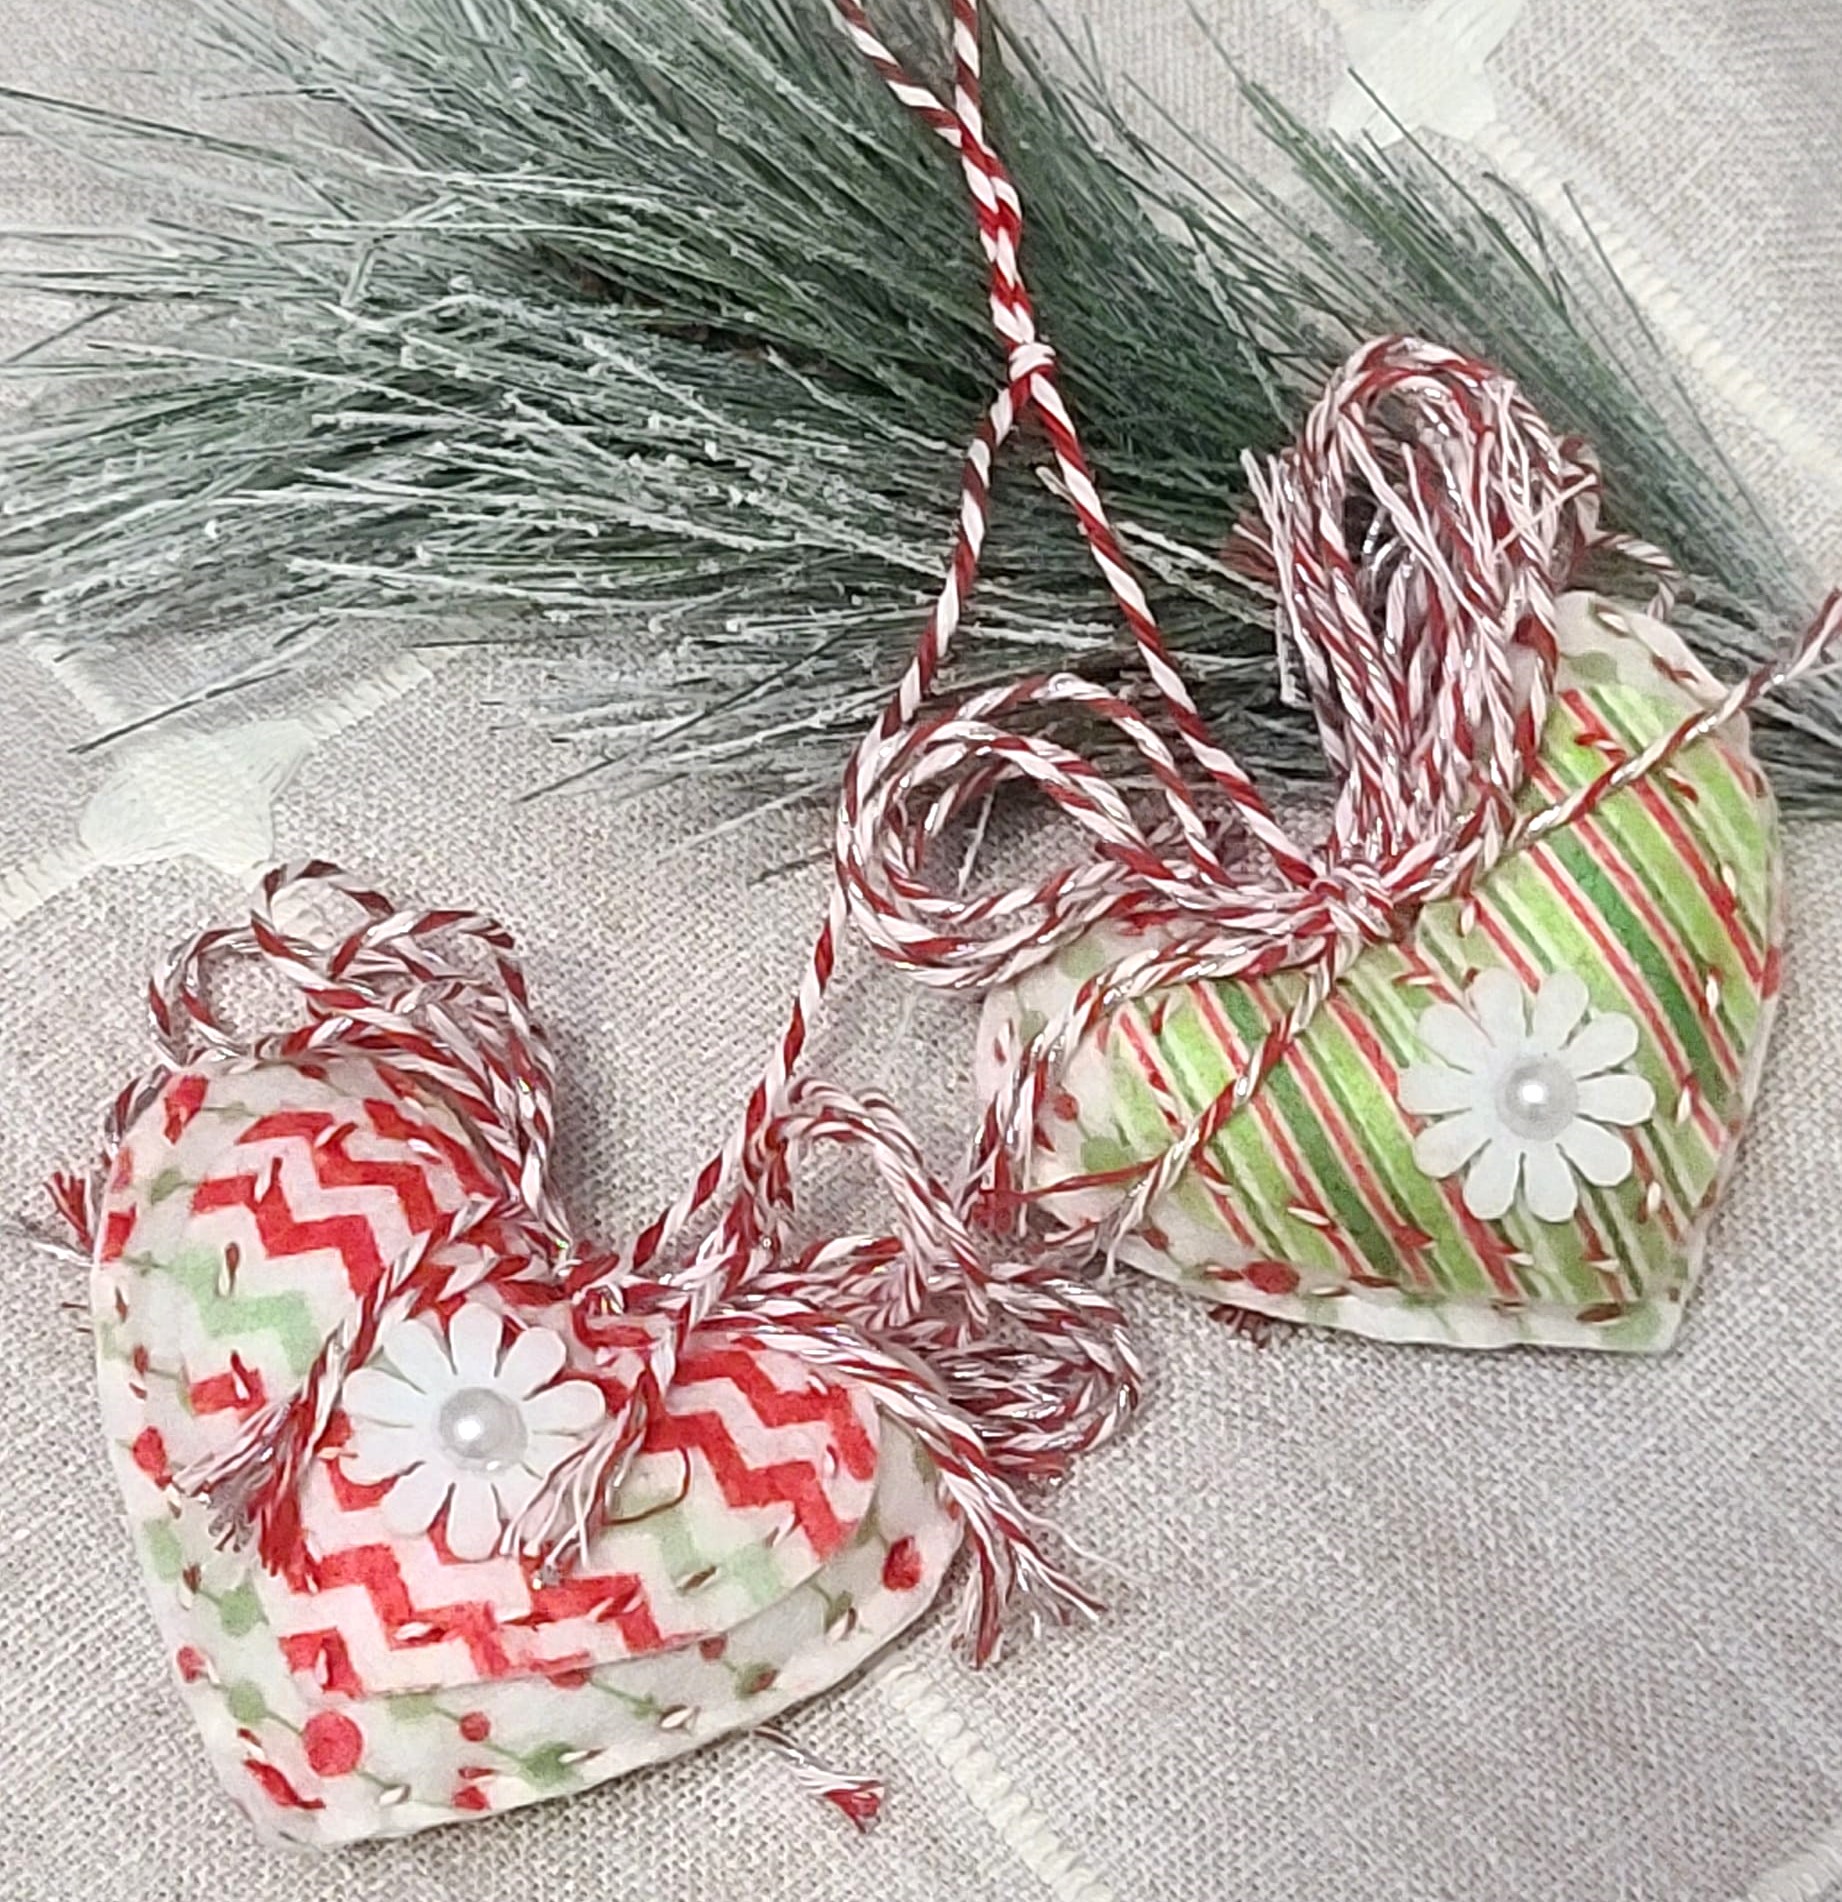 Double heart ornaments whimsical green and red colors